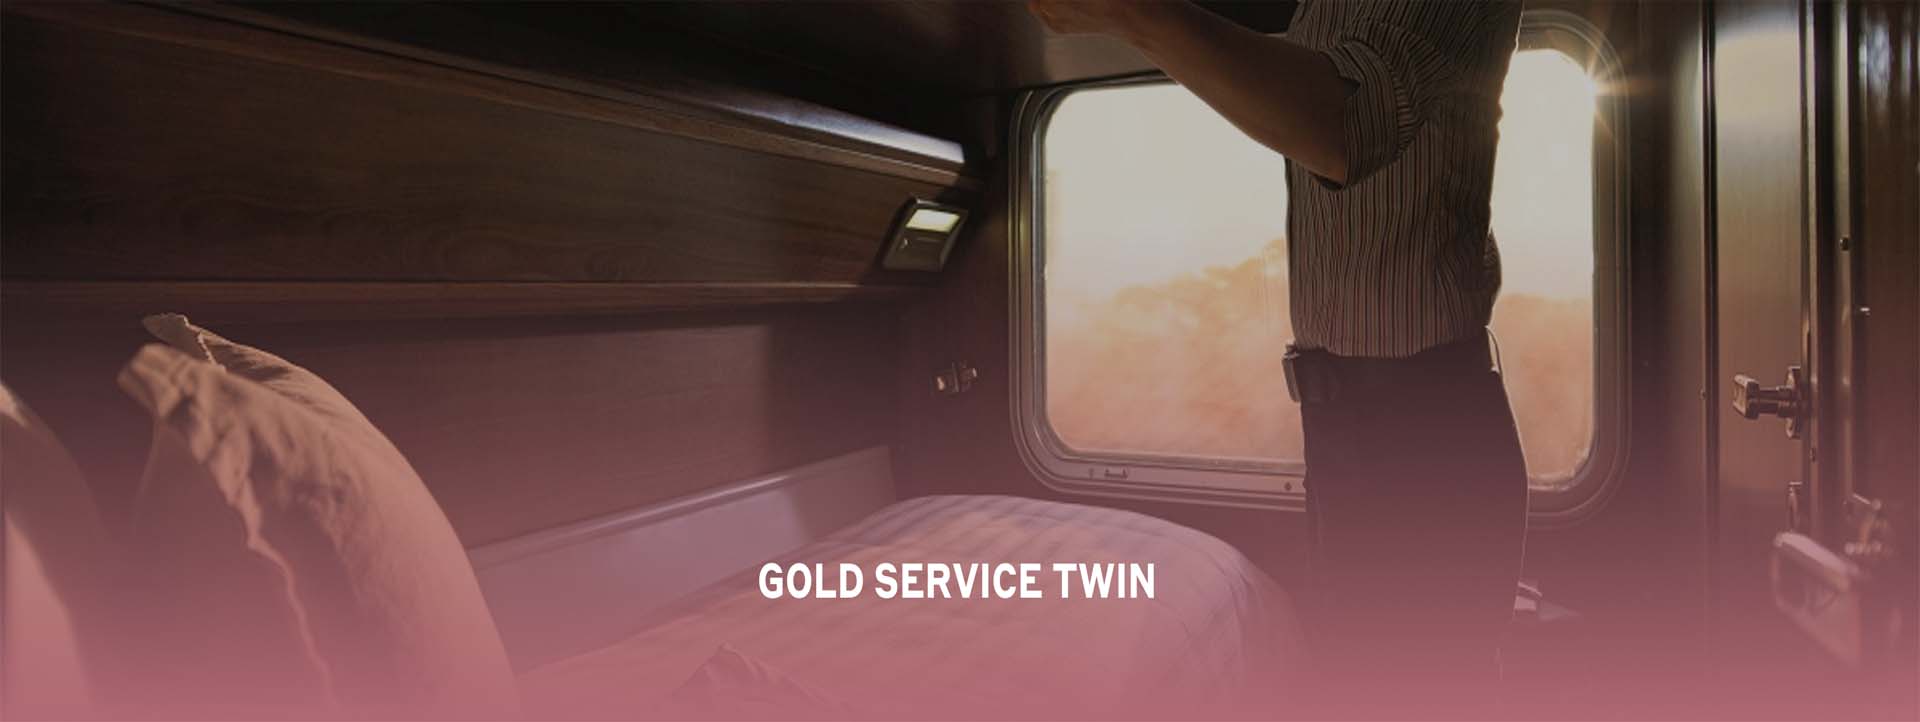 GOLD SERVICE TWIN CABIN SERVICES slider